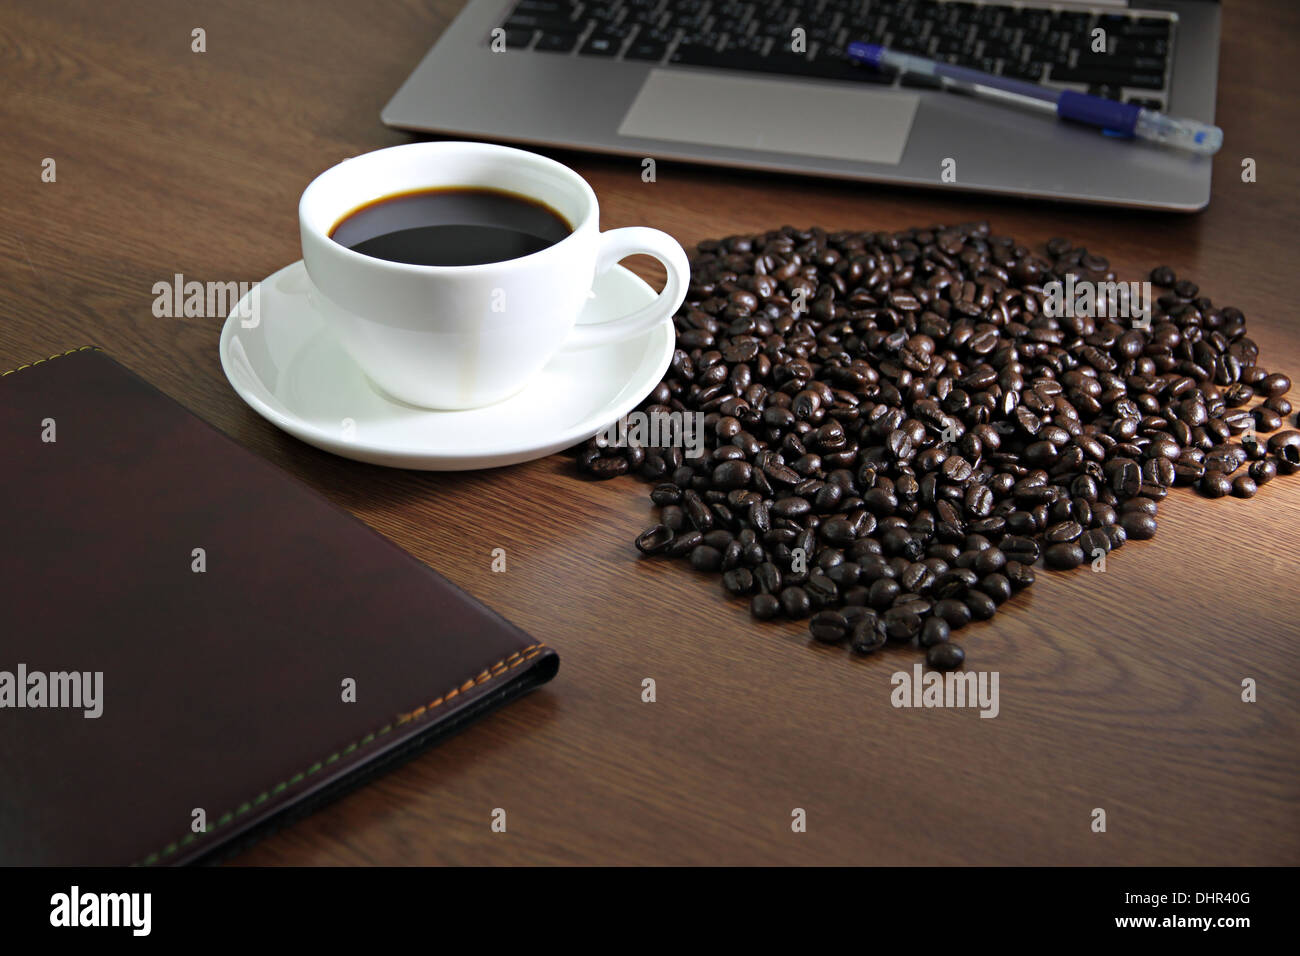 Picture focus on Coffee in white cup nearby the computer notebook. Stock Photo